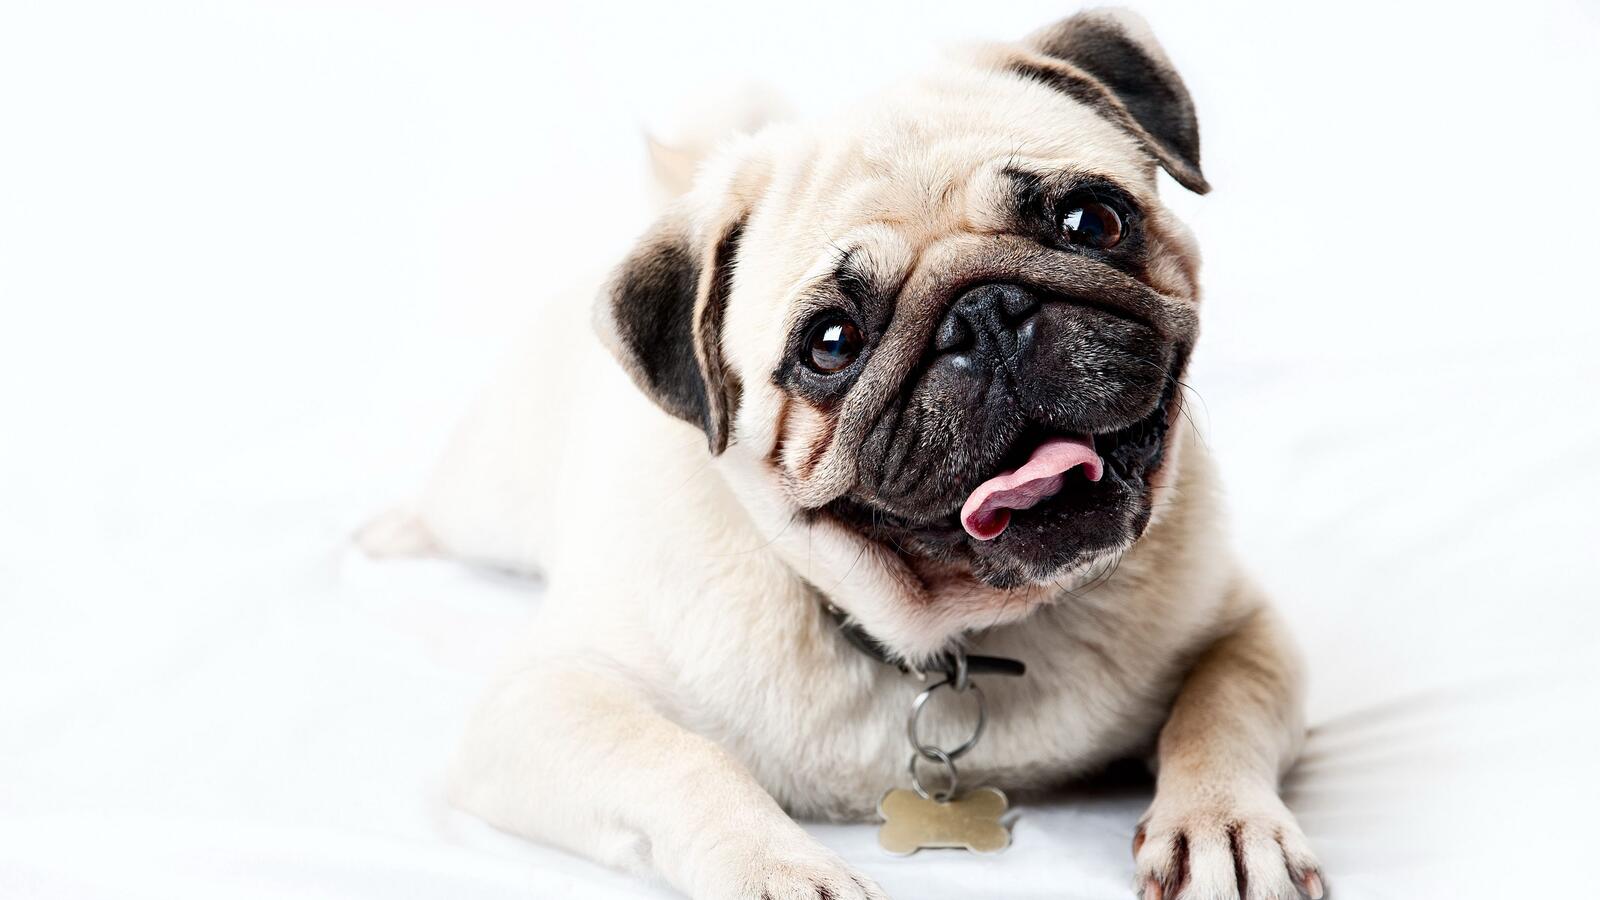 Wallpapers wallpaper pug close white background on the desktop